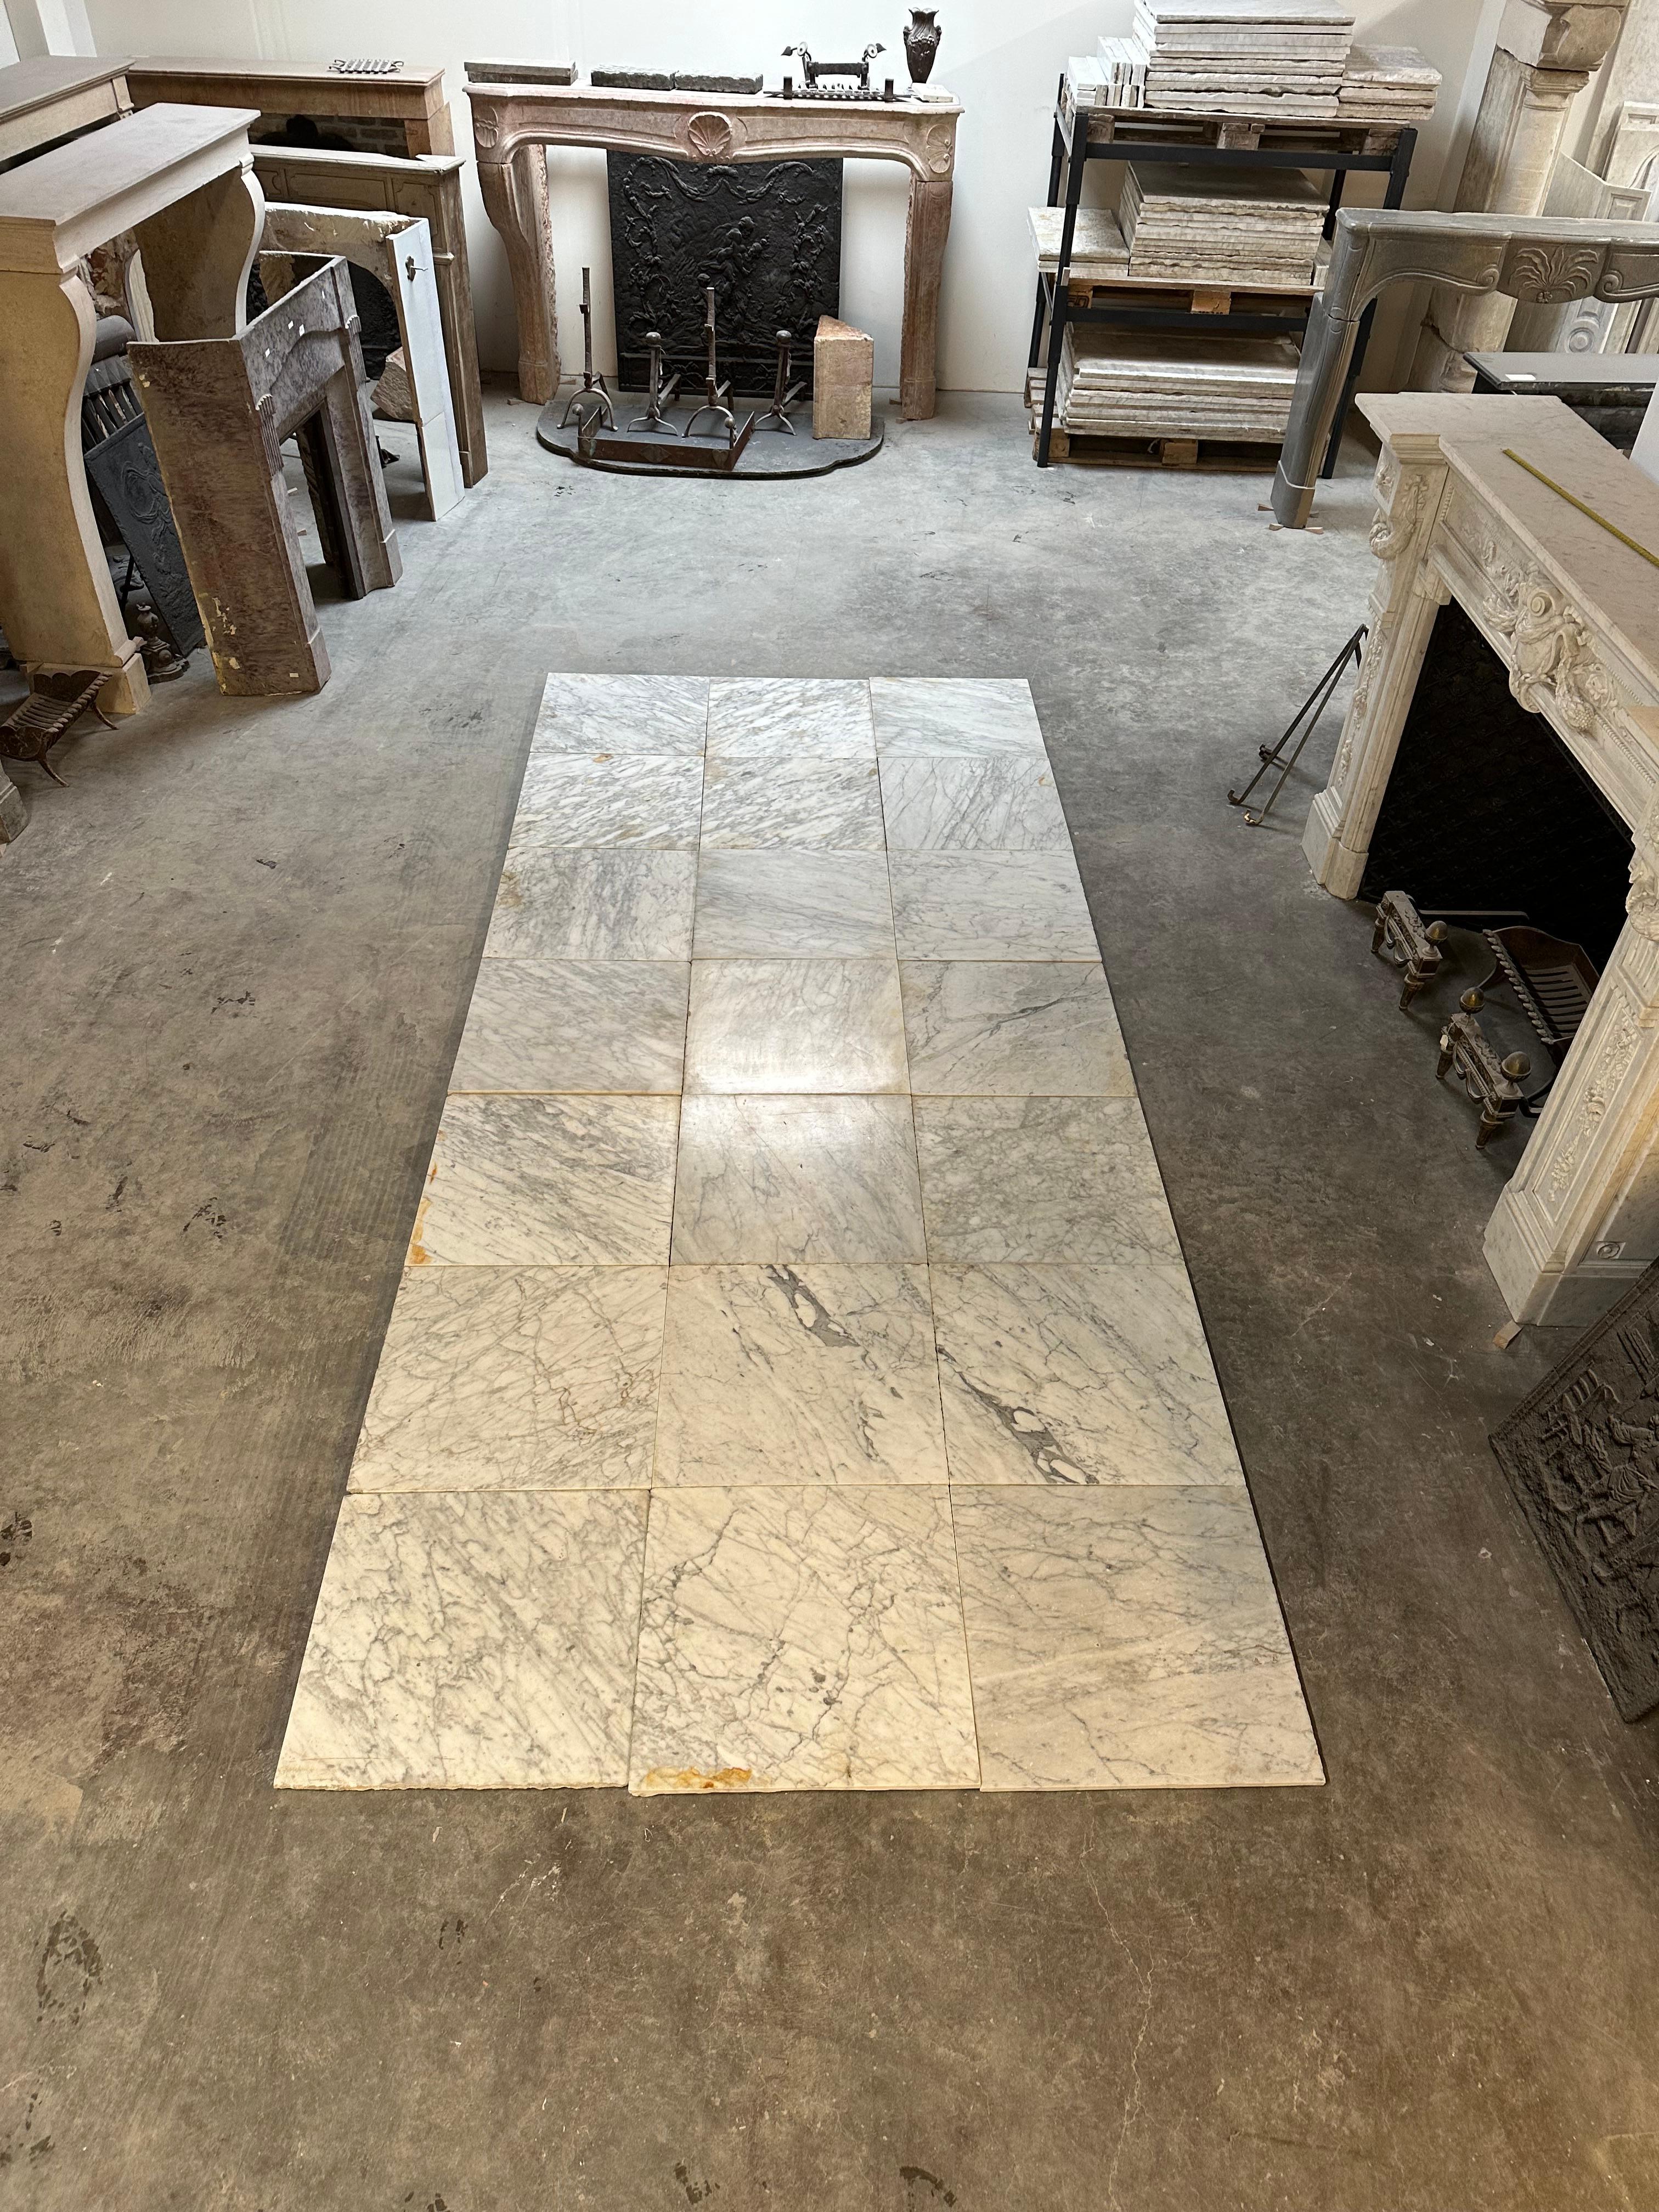 Very please to offer this beautiful Arabescato marble floor.
This used to be the hallway in a late 19th. century hallway in the city center of Amsterdam. The floor dates back to approx. 1870.

This Arabescato marble has a beautiful white font with